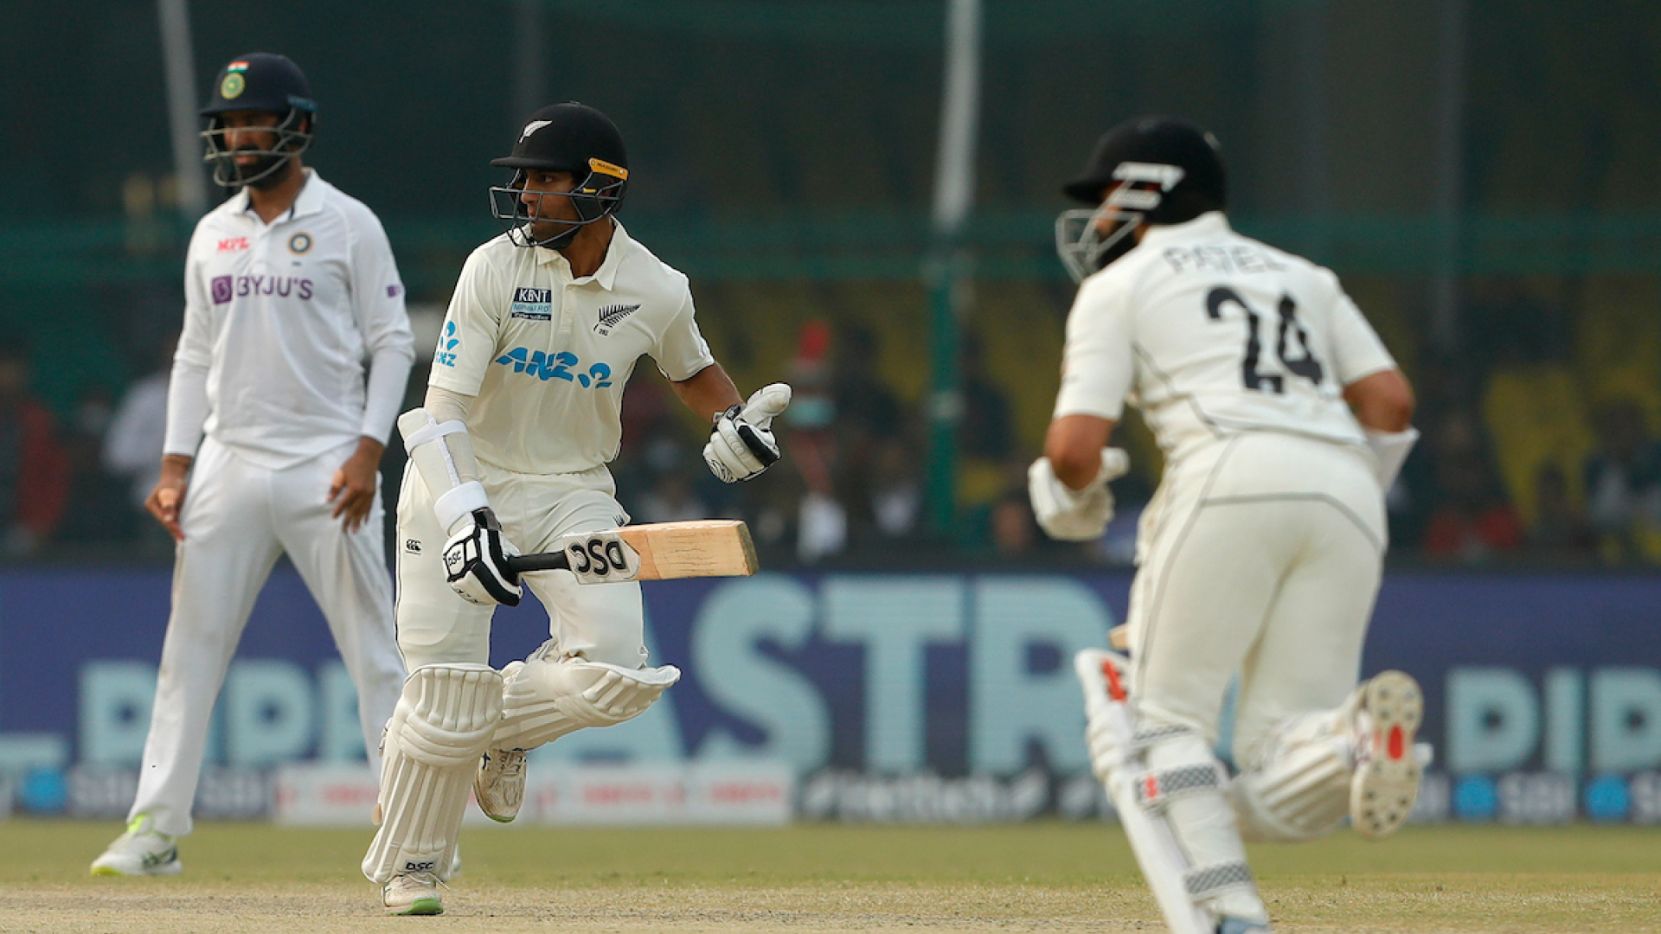 IND vs NZ | Ravindra to rescue & Twitter can’t have enough of the debutant’s determination